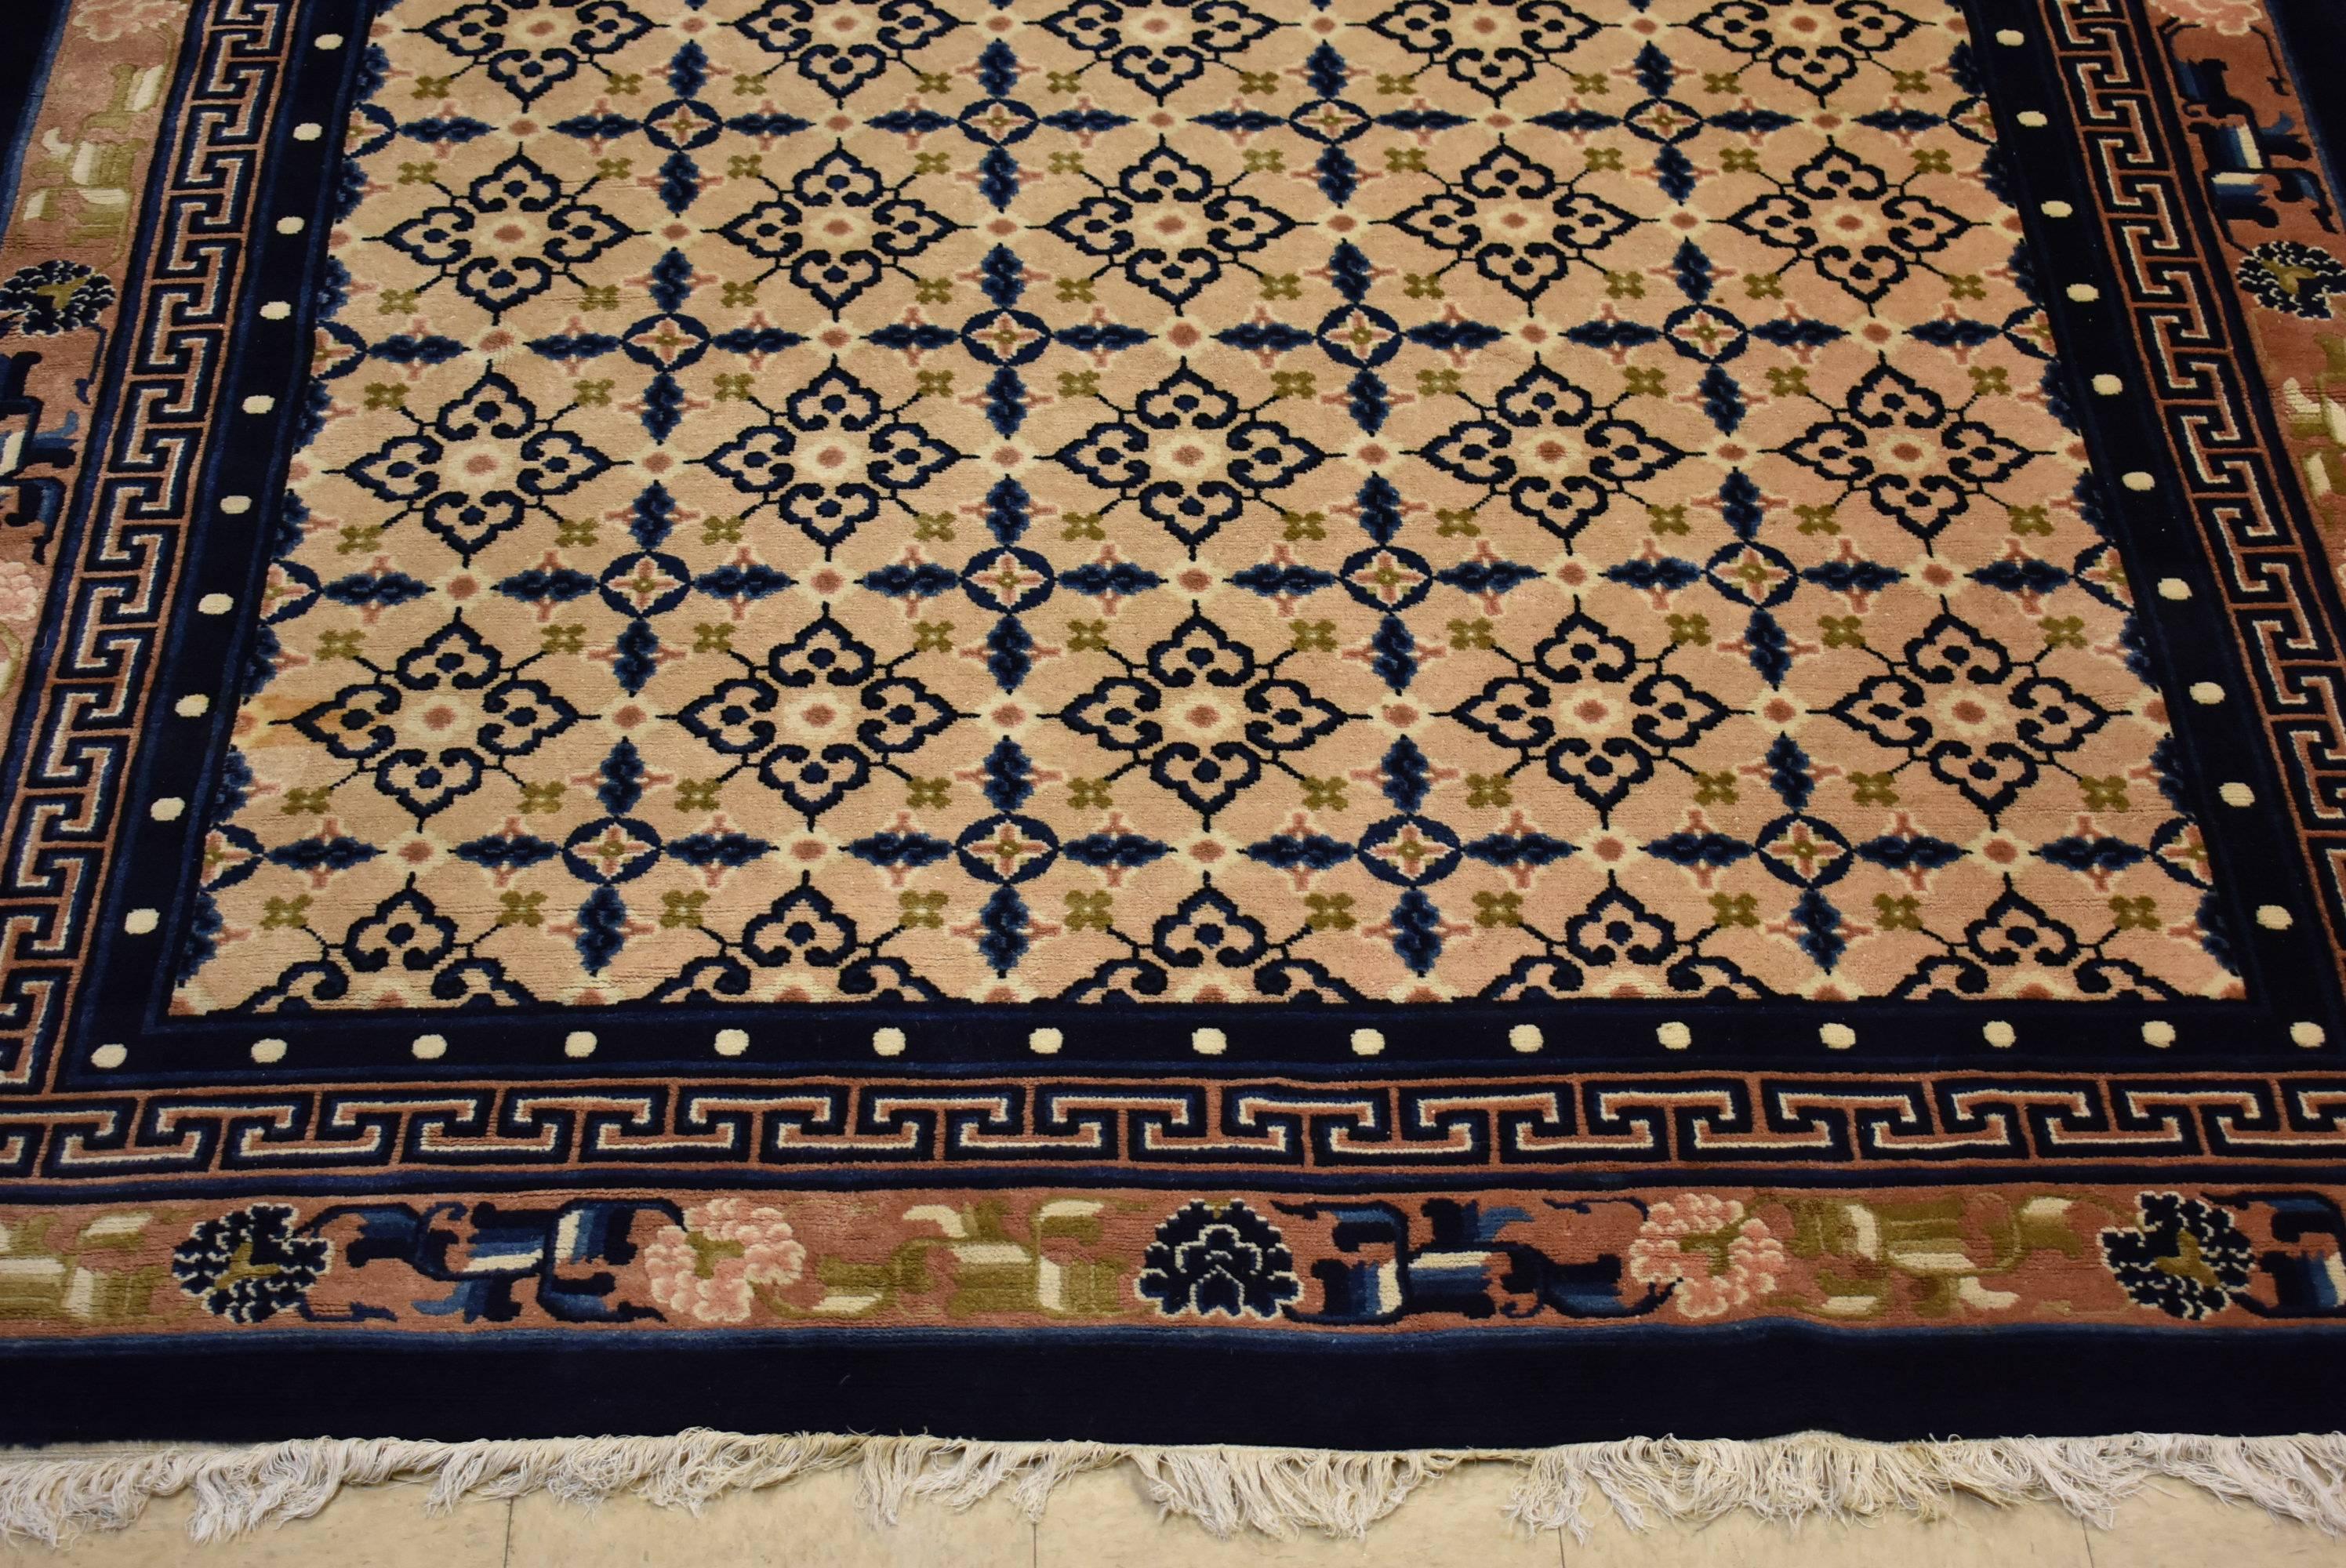 An exquisite Chinese Oriental rug. This beautiful rug was hand tied in shades of navy, cream, rose, green and black. Very good condition. There are a couple faint stains and the rights side is slightly darker. This has just been professionally